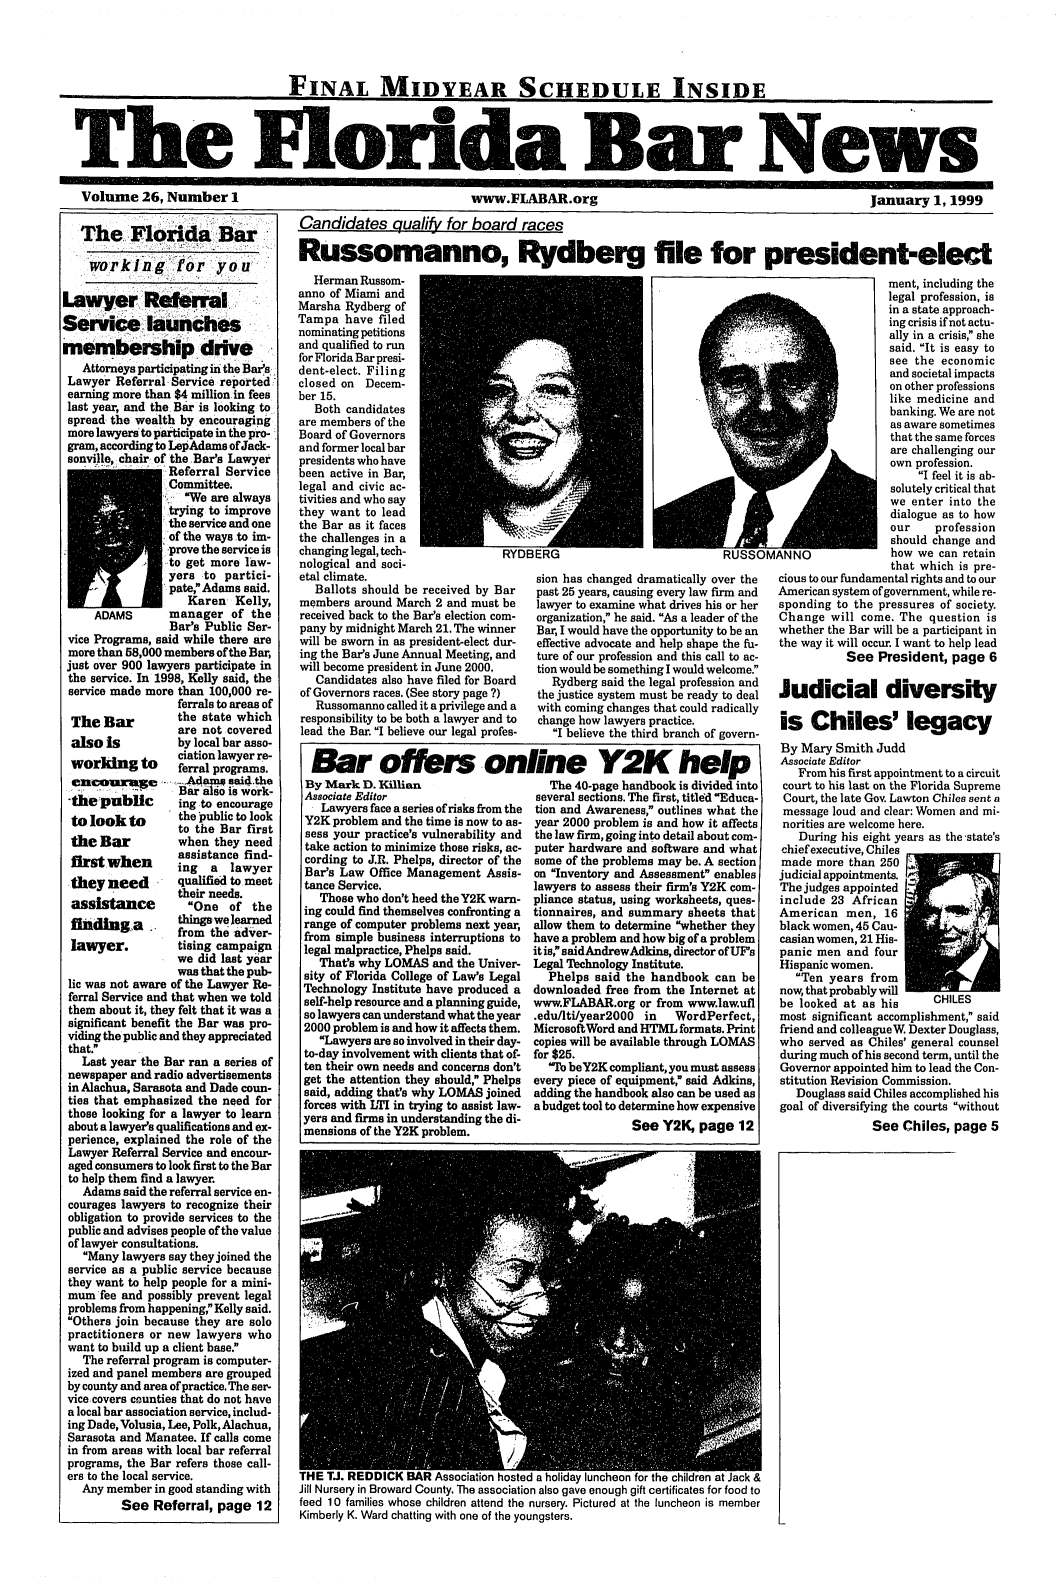 handle is hein.barjournals/flabn0026 and id is 1 raw text is: 




                                  FINAL MIDYEAR SCHEDULE INSIDE




Vthe Floida BarJar

Volume 26, Number I                                            www.FLABAR.org                                                  January1, 1999


   The FloridaBar

   working for you-

Lawyer Referral
Service launches

membership.drive
   Attorneys participating in the Bar's
 Lawyer Referral Service reported
 earning more than $4 million in fees
 last year, and the Bar is looking to
 spread the wealth by encouraging
 more lawyers to participate in the pro-
 gram, according to LepAdams of Jack-
 sonville, chair of theBar's Lawyer
                 Referral Service
                 Committee.
                   We are always
                 trying to improve
                 the service and one
                 rof the ways to im-
                 :1  provethe service is
                 to get more law-
                 yers to partici-
                 -  pate,Adams said.
                    Karen Kelly,
     ADAMS       manager of the
                 Bar's Public Ser-
 vice Programs, said while there are
 more than 58,000 members of the Bar,
 just over 900 lawyers participate in
 the service. In 1998, Kelly said, the
 service made more than 100,000 re-
                   ferrals to areas of
  The Bar          the state which
                   are not covered
 also Is           by local bar asso-
                   ciation lawyer re-
 woring to         ferral programs.
                   n~e.~~s .aid.the
  ........          ar also is work-
  the public       ing to encourage
  to look to       the public to look
                   to the Bar first
 the Bar           when they need
                   assistance find-
 first when        ing  a  lawyer
 they need         qualified to meet
                  their needs.
 assistance         One of the
 filidinga        thingswe learned
                 from the adver-
 lawyer.           tising campaign
                   we did last year
                   was that the pub-
 lic was not aware of the Lawyer Re-
 ferral Service and that when we told
 them about it, they felt that it was a
 significant benefit the Bar was pro-
 viding the public and they appreciated
 that.
   Last year the Bar ran a series of
 newspaper and radio advertisements
 in Alachua, Sarasota and Dade coun-
 ties that emphasized the need for
 those looking for a lawyer to learn
 about a lawyer's qualifications and ex-
 perience, explained the role of the
 Lawyer Referral Service and encour-
 aged consumers to look first to the Bar
 to help them find a lawyer.
   Adams said the referral service en-
 courages lawyers to recognize their
 obligation to provide services to the
 public and advises people of the value
 of lawyer consultations.
   Many lawyers say they joined the
 service as a public service because
 they want to help people for a mini-
 mum fee and possibly prevent legal
 problems from happening, Kelly said.
 Others join because they are solo
 practitioners or new lawyers who
 want to build up a client base.
   The referral program is computer-
 ized and panel members are grouped
 by county and area of practice. The ser-
 vicecovers counties that do not have
 a local bar association service, includ-
 ing Dade, Volusia, Lee, Polk, Alachua,
 Sarasota and Manatee. If calls come
 in from areas with local bar referral
 programs, the Bar refers those call-
 ers to the local service.
   Any member in good standing with
          See Referral, page 12


Candidates qualify for board races

Russomanno, Rydberg file for president-elect


  Herman Russom-
anno of Miami and
Marsha Rydberg of
Tampa have filed
nominating petitions
and qualified to run
for Florida Bar presi-
dent-elect. Filing
closed on Decem-
ber 15.
   Both candidates
are members of the
Board of Governors
and former local bar
presidents who have
been active in Bar,
legal and civic ac-
tivities and who say
they want to lead
the Bar as it faces
the challenges in a
changing legal, tech-            RY5
nological and soci-
etal climate.
   Ballots should be received by Bar
members around March 2 and must be
received back to the Bar's election com-
pany by midnight March 21. The winner
will be sworn in as president-elect dur-
ing the Bar's June Annual Meeting, and
will become president in June 2000.
   Candidates also have filed for Board
of Governors races. (See story page ?)
   Russomanno called it a privilege and a
responsibility to be both a lawyer and to
lead the Bar. I believe our legal profes-


sion has changed dramatically over the
past 25 years, causing every law firm and
lawyer to examine what drives his or her
organization, he said. As a leader of the
Bar, I would have the opportunity to be an
effective advocate and help shape the fu-
ture of our profession and this call to ac-
tion would be something I would welcome.
   Rydberg said the legal profession and
the justice system must be ready to deal
with coming changes that could radically
change how lawyers practice.
   I believe the third branch of govern-


Bar offers online Y2K help
By Mark D. Killian                      The 40-page handbook is divided into
Associate Editor                     several sections. The first, titled 'Educa-
   Lawyers face a series of risks from the  tion and Awareness, outlines what the
Y2K problem and the time is now to as- year 2000 problem is and how it affects
sess your practice's vulnerability and  the law firm, going into detail about com-
take action to minimize those risks, ac- puter hardware and software and what
cording to J.R. Phelps, director of the  some of the problems may be. A section
Bar's Law Office Management Assis- on Inventory and Assessment enables
tance Service.                       lawyers to assess their firm's Y2K com-
   Those who don't heed the Y2K warn- pliance status, using worksheets, ques-
ing could find themselves confronting a  tionnaires, and summary sheets that
range of computer problems next year, allow them to determine whether they
from simple business interruptions to have a problem and how big of a problem
legal malpractice, Phelps said.      it is, saidAndrewAdkins, director of UFs
   That's why LOMAS and the Univer- Legal Technology Institute.
sity of Florida College of Laws Legal  Phelps said the handbook can be
Technology Institute have produced a downloaded free from the Internet at
self-help resource and a planning guide, www.FLABAR.org or from www.law.ufl
so lawyers can understand what the year .edu/lti/year2000 in WordPerfect,
2000 problem is and how it affects them. MicrosoftWord and HTML formats. Print
   Lawyers are so involved in their day- copies will be available through LOMAS
to-day involvement with clients that of- for $25.
ten their own needs and concerns don't   oIb beY2K compliant, you must assess
get the attention they should, Phelps every piece of equipment, said Adkins,
said, adding that's why LOMAS joined adding the handbook also can be used as
forces with LTI in trying to assist law- a budget tool to determine how expensive
yers and firms in understanding the di-              See Y2K page 12
mensions of the Y2K problem.


lll . i. l. rui s .  nOOUIaUUsI, I IoIUo Ljaa  IIUIItJay  IUI nIIoI IrUI I   L, IIIUI CII at  ja.I.&,
Jill Nursery in Broward County. The association also gave enough gift certificates for food to
feed 10 families whose children attend the nursery. Pictured at the luncheon is member
Kimberly K. Ward chatting with one of the youngsters.


                  ment, including the
                  legal profession, is
                  in a state approach-
                  ing crisis if not actu-
                  ally in a crisis, she
                  said. It is easy to
                  see the economic
                  and societal impacts
                  on other professions
                  like medicine and
                  banking. We are not
                  as aware sometimes
                  that the same forces
                  are challenging our
                  own profession.
                       I feel it is ab-
                  solutely critical that
                  we enter into the
                  dialogue as to how
                  our    profession
                  should change and
IANNO             how we can retain
                  that which is pre-
cious to our fundamental rights and to our
American system of government, while re-
sponding to the pressures of society.
Change will come. The question is
whether the Bar will be a participant in
the way it will occur. I want to help lead
           See President, page 6

Judicial diversity

is Chiles' legacy
By Mary Smith Judd
Associate Editor
   From his first appointment to a circuit
 court to his last on the Florida Supreme
 Court, the late Gov. Lawton Chiles sent a
 message loud and clear: Women and mi-
 norities are welcome here.
    During his eight years as the -state's
 chief executive, Chiles
 made more than 250
 judicial appointments.
 The judges appointed
 include 23 African
 American men, 16
 black women, 45 Cau-
 casian women, 21 His-
 panic men and four
 Hispanic women.
   Ten years from
now, that probably will
be looked at as his      CHILES
most significant accomplishment, said
friend and colleagueW Dexter Douglass,
who served as Chiles' general counsel
during much of his second term, until the
Governor appointed him to lead the Con-
stitution Revision Commission.
   Douglass said Chiles accomplished his
 goal of diversifying the courts without
               See Chiles, page 5


